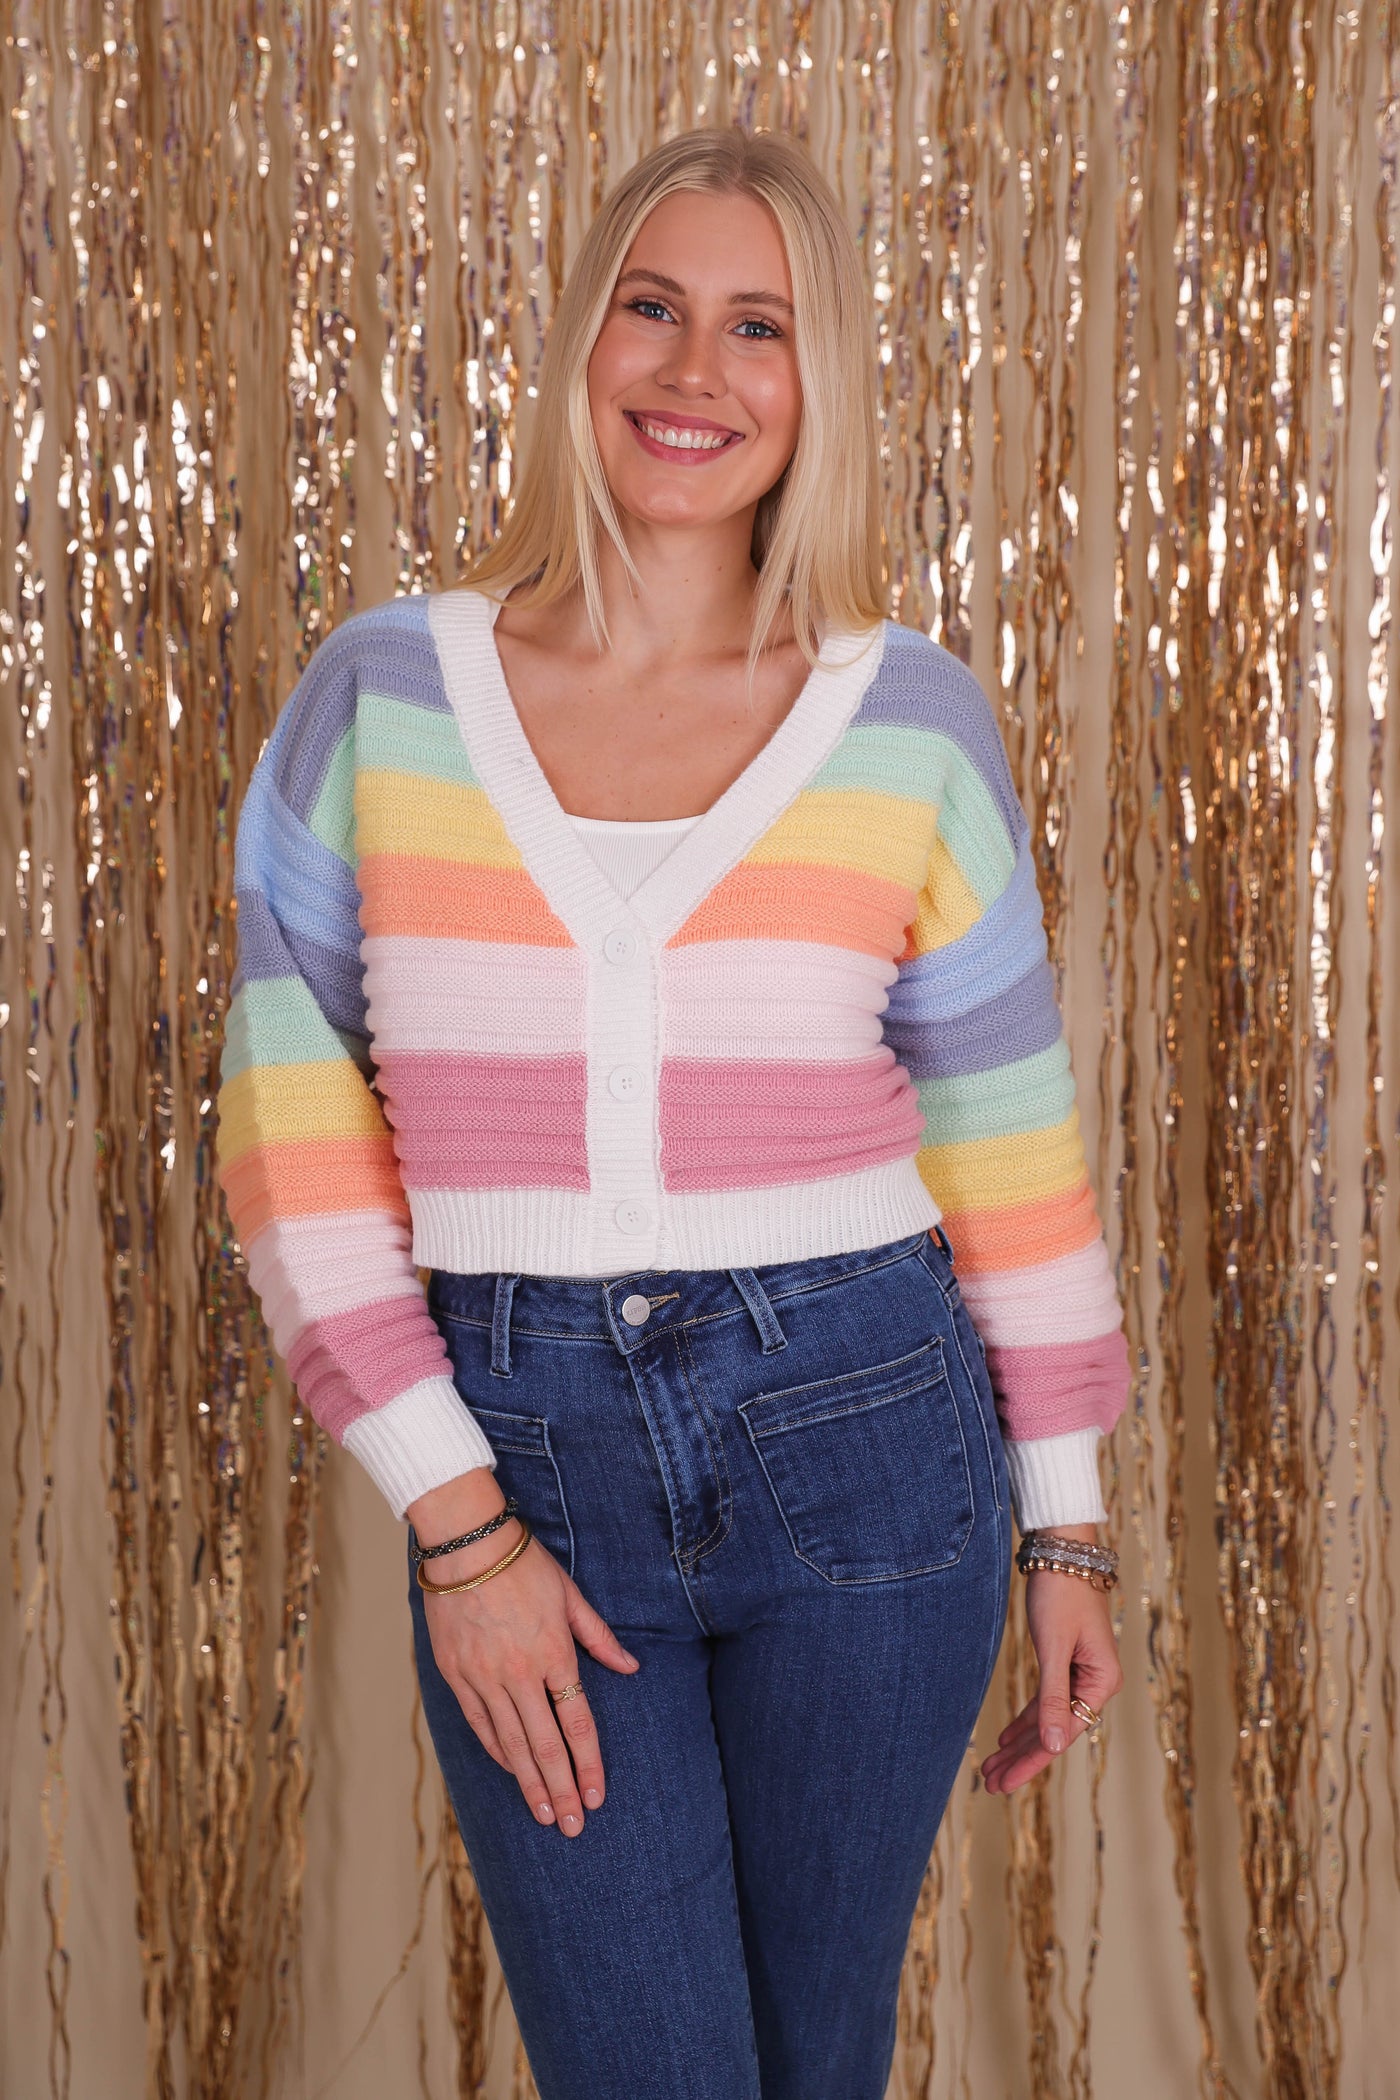 Women's Cropped Rainbow Cardigan- Women's Fun Rainbow Sweater- Colorful Fall Clothes